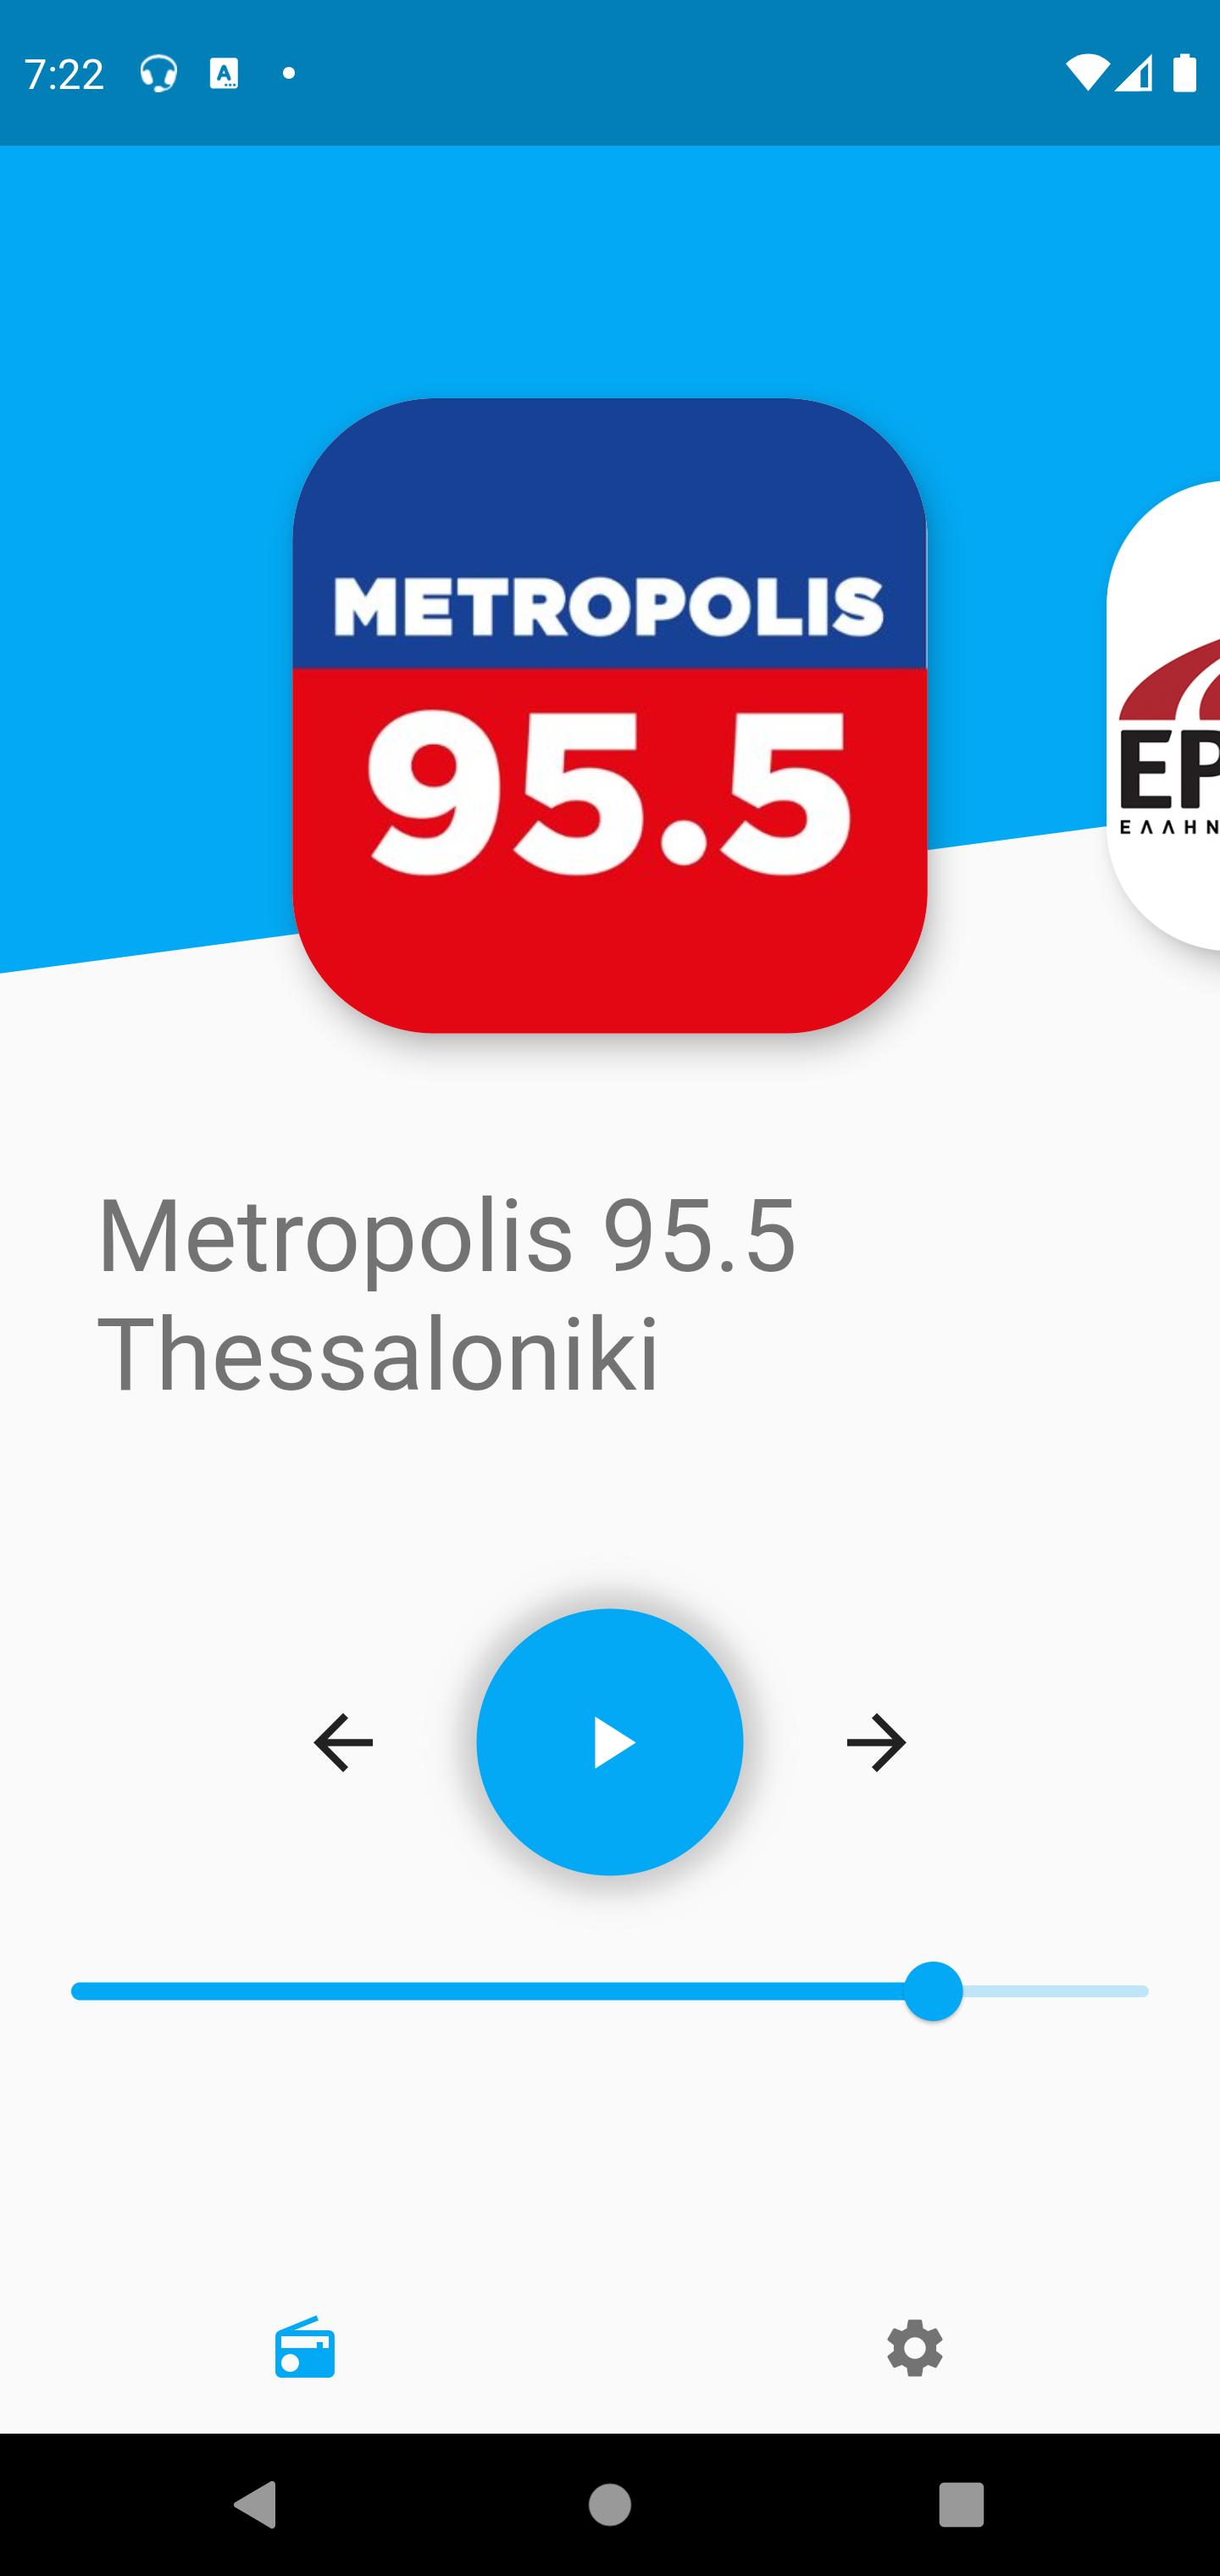 Radio Greece for Android - APK Download